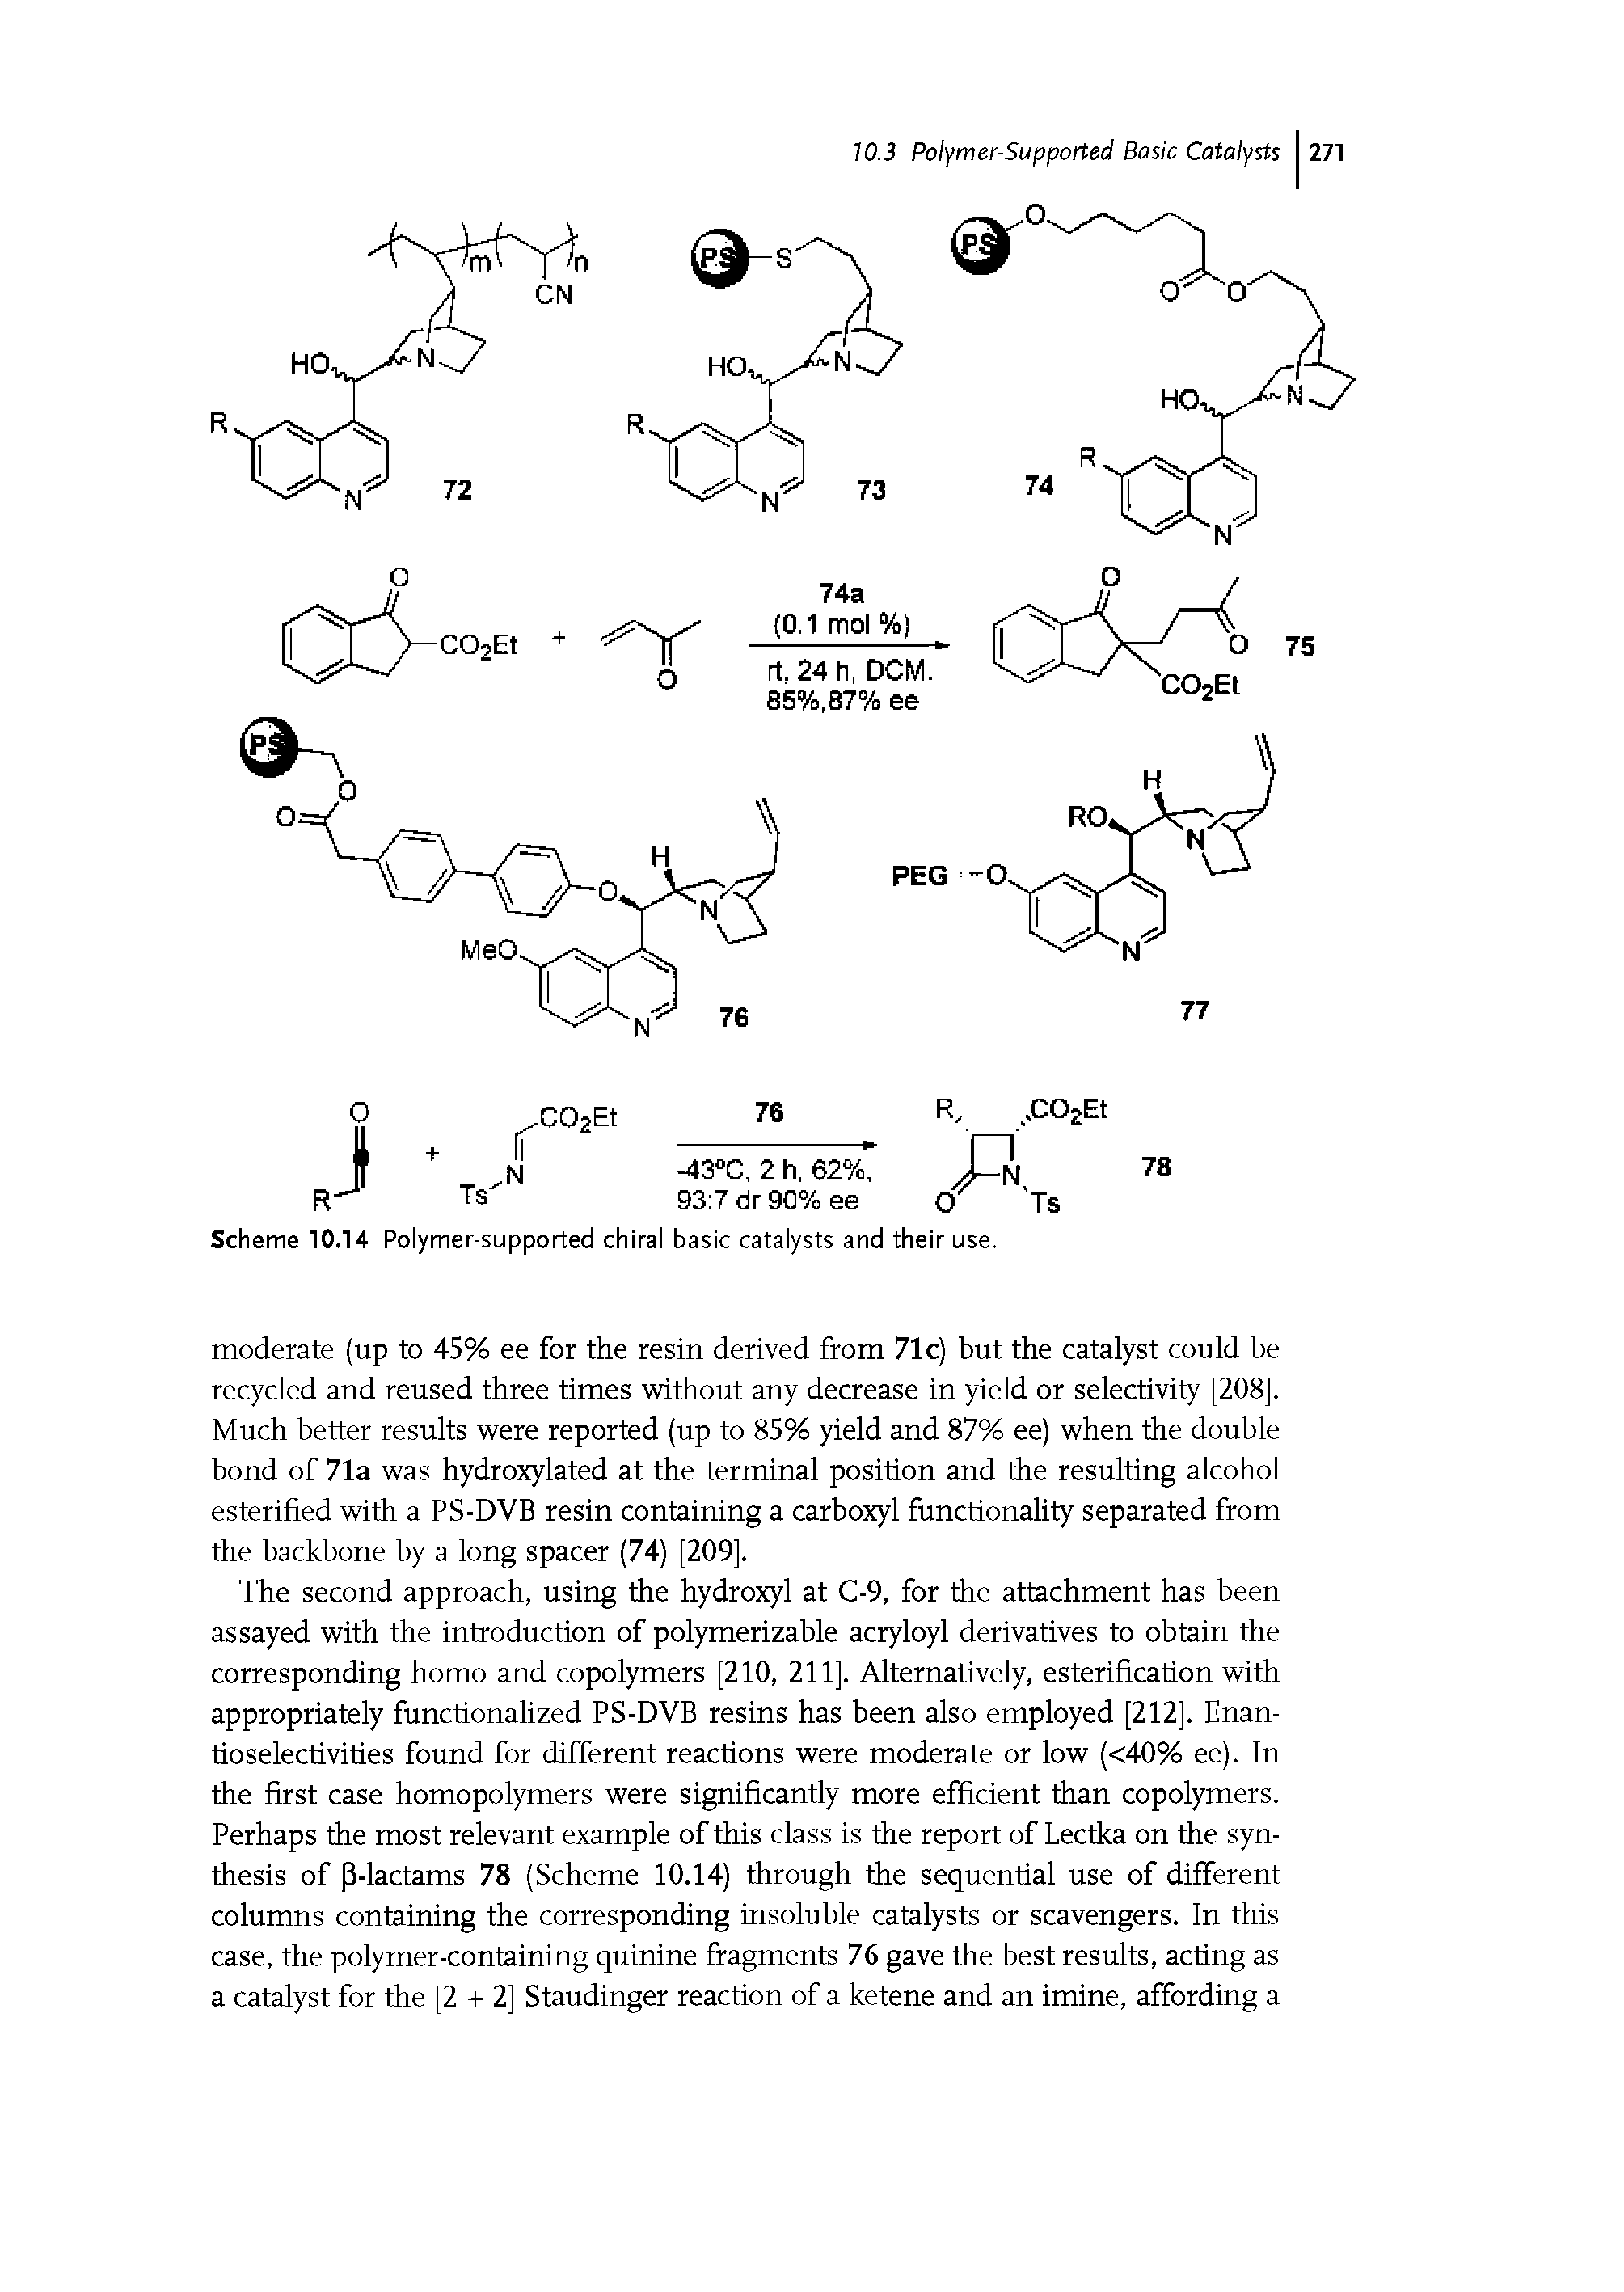 Scheme 10.14 Polymer-supported chiral basic catalysts and their use.